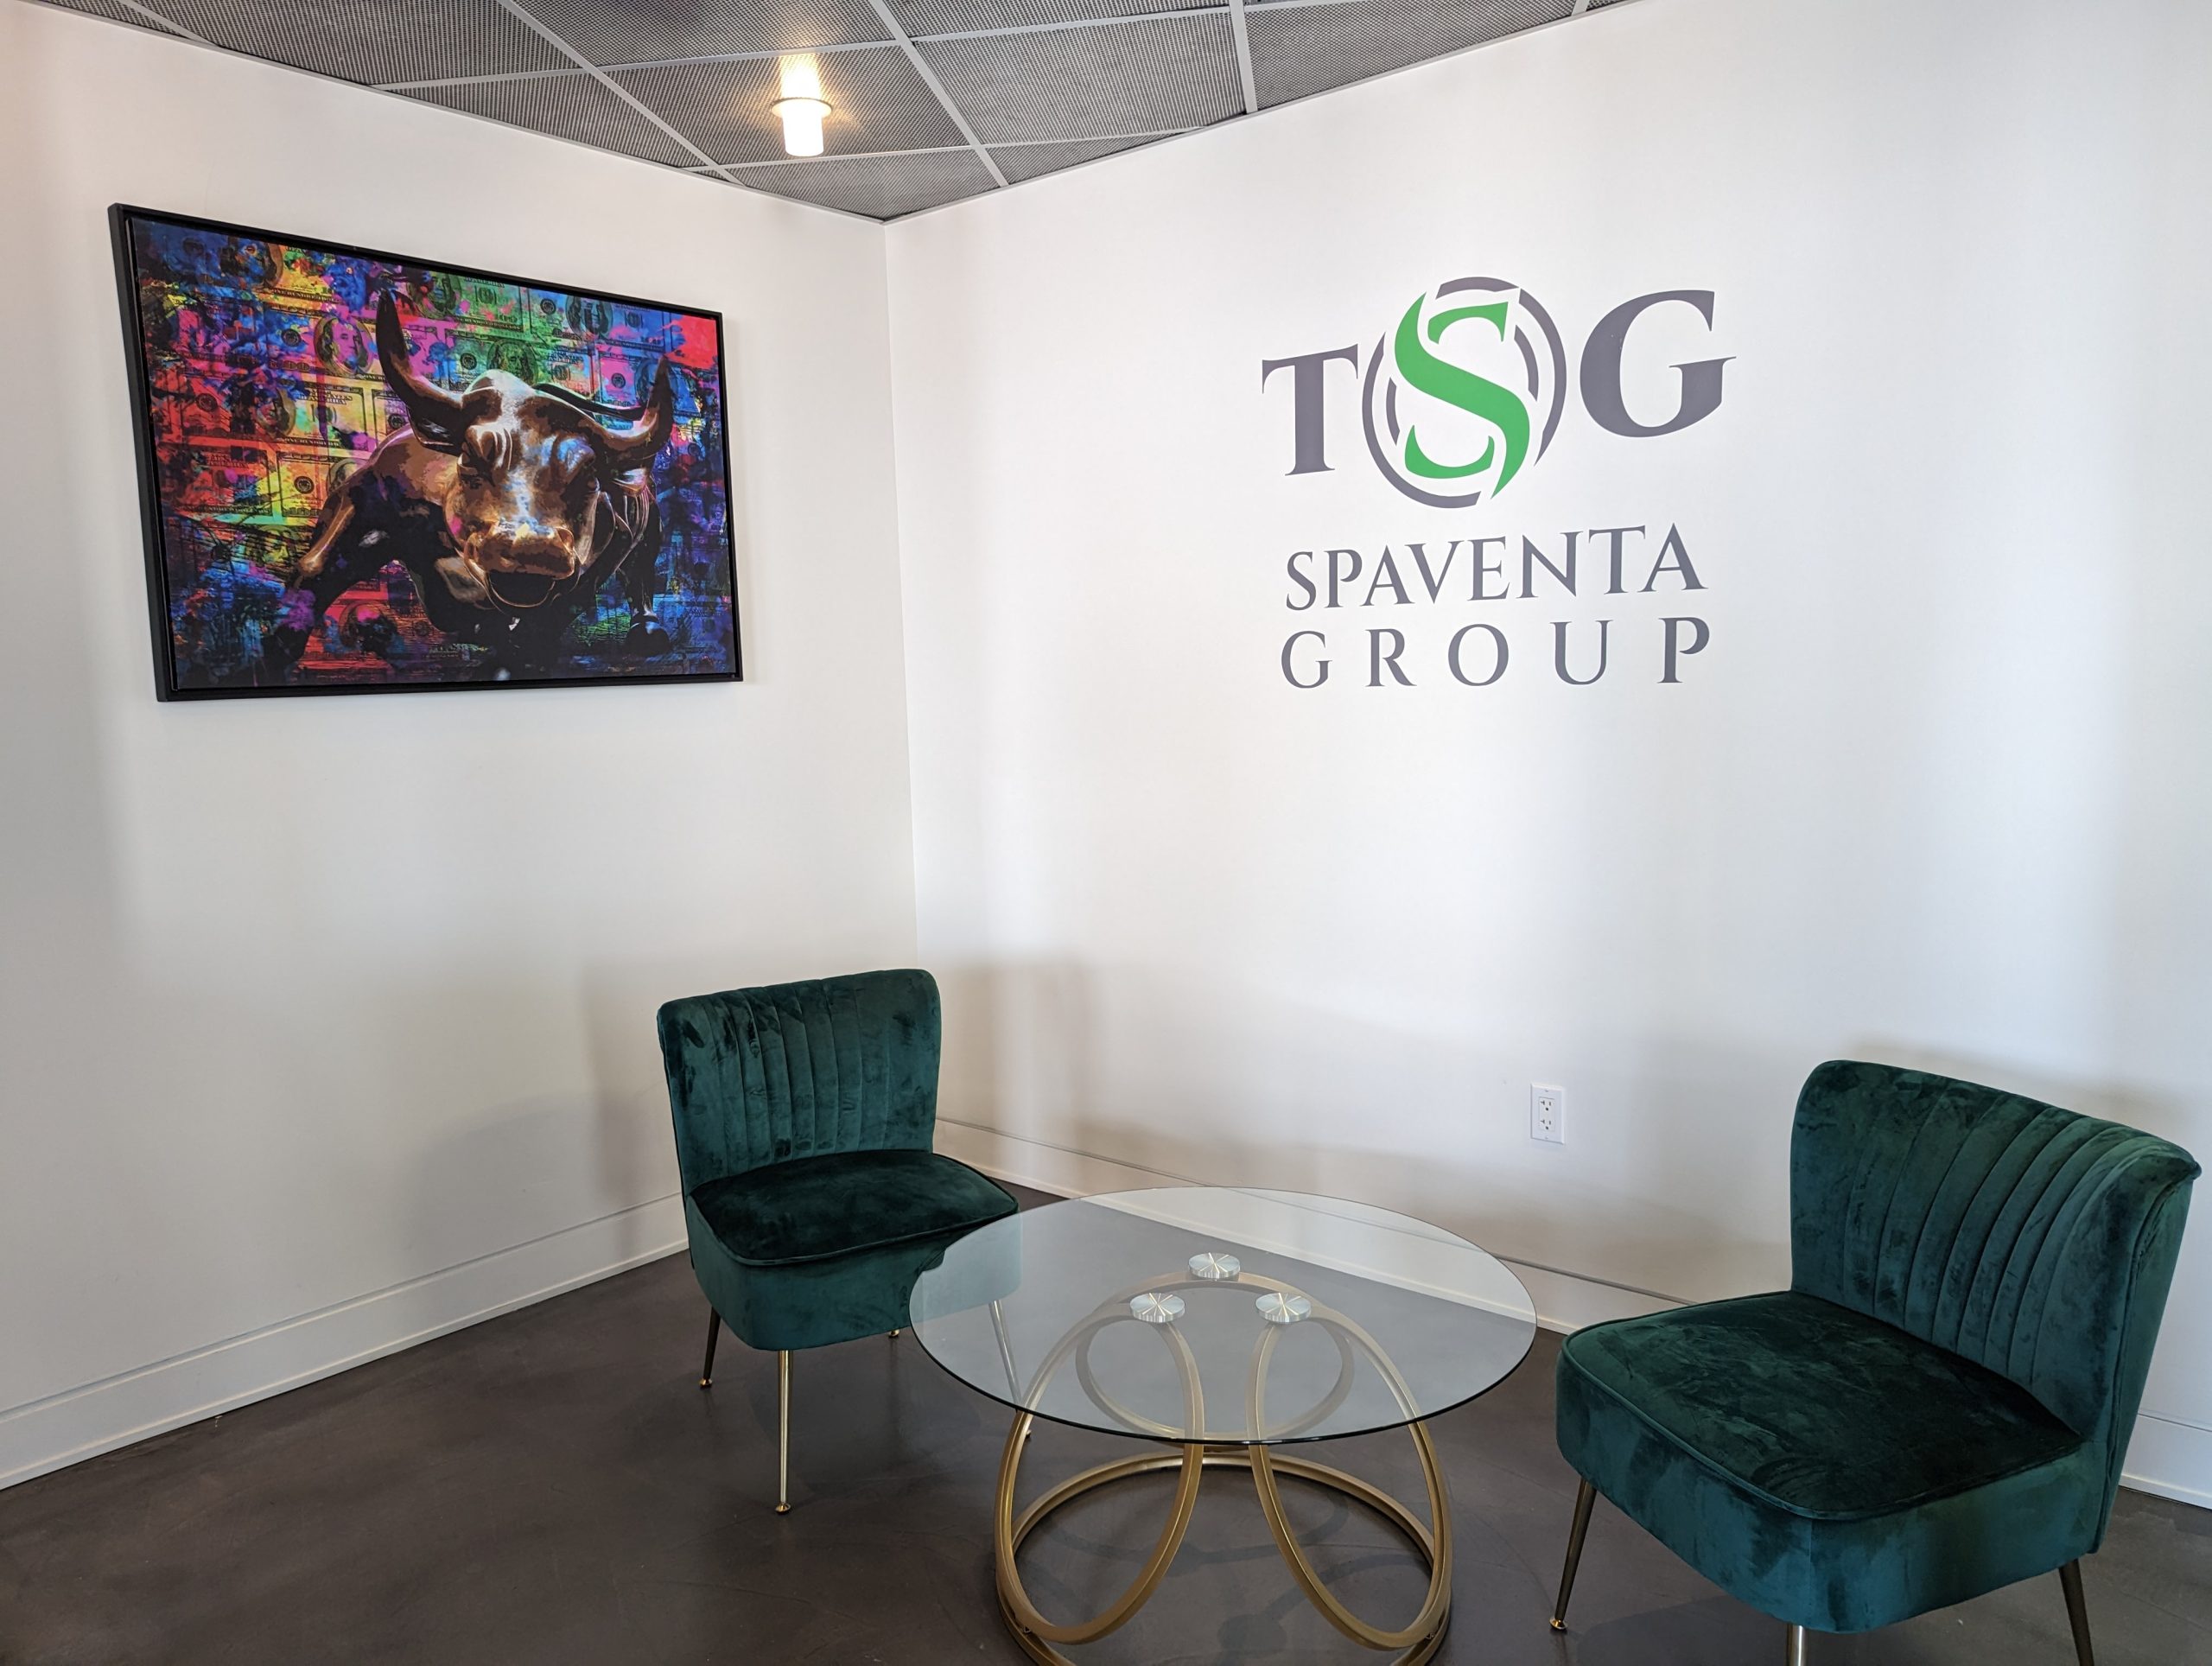 tsg spaventa group wall decals nj city scaled